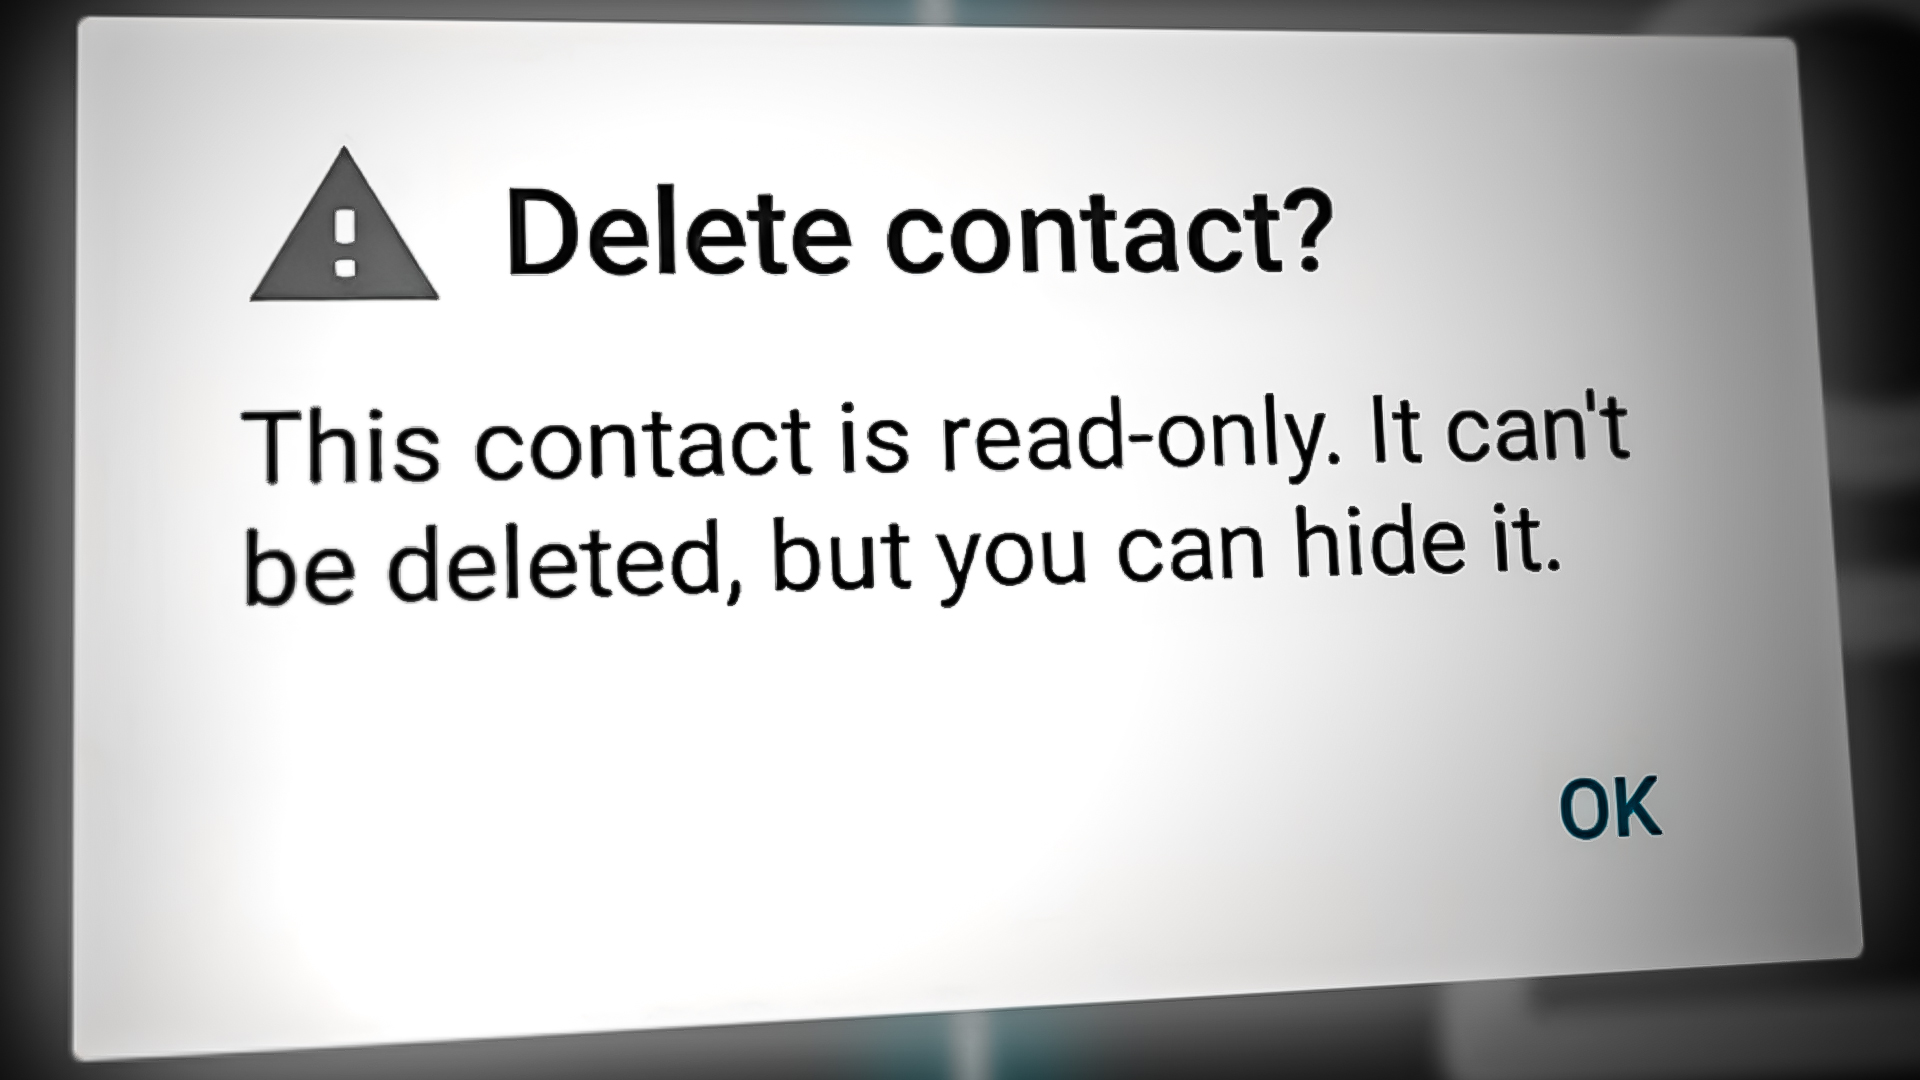 What are Read-only Contacts?